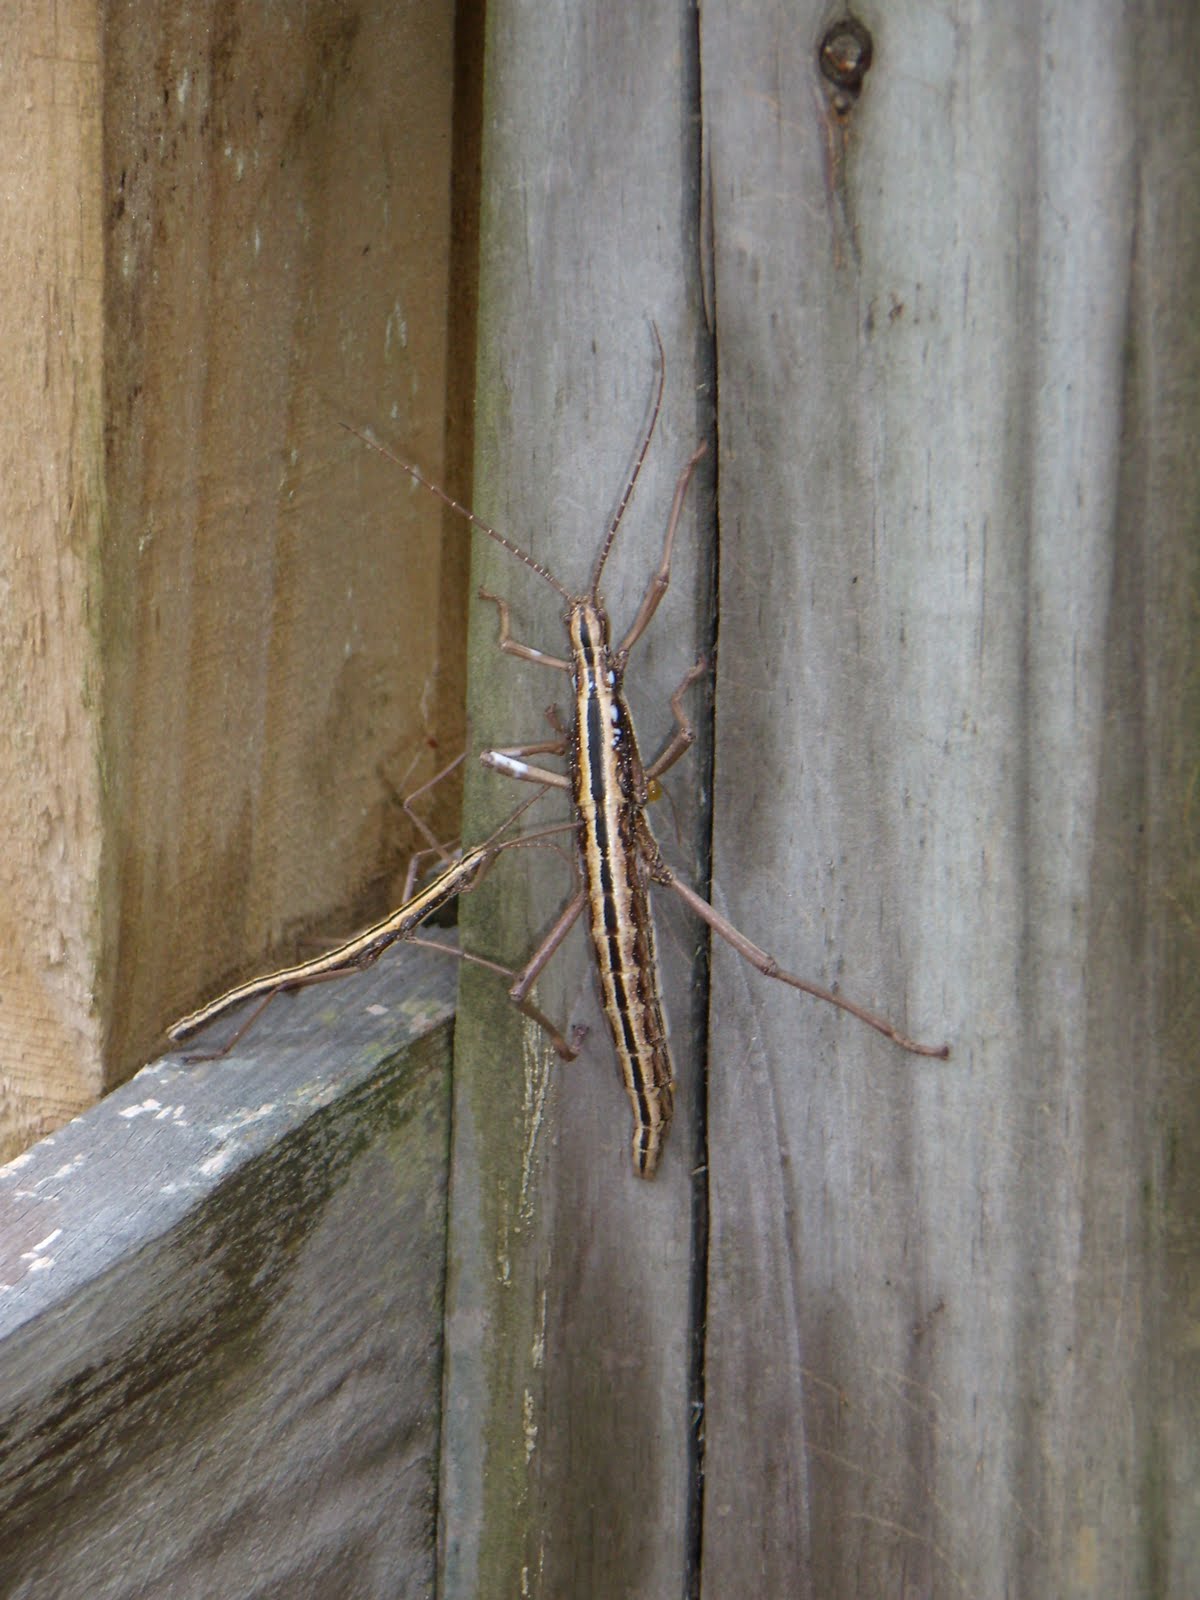 A male two-striped walking stick about to reclaim his female mate. Photo used courtesy of Alex Vail.